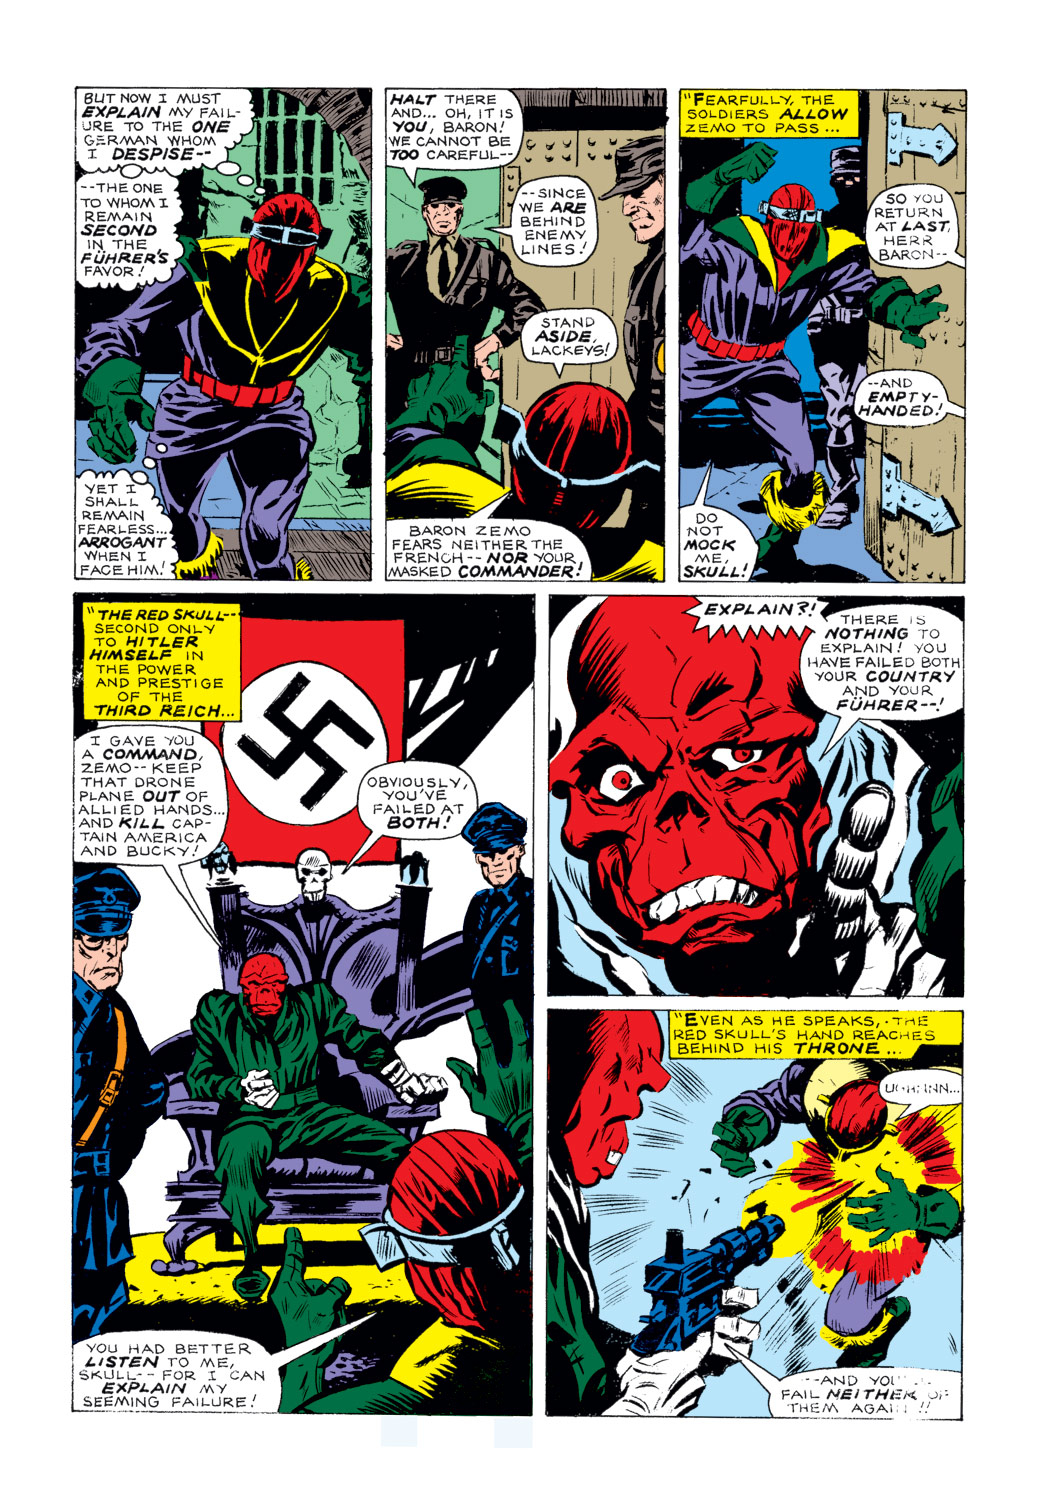 What If? (1977) issue 5 - Captain America hadn't vanished during World War Two - Page 7